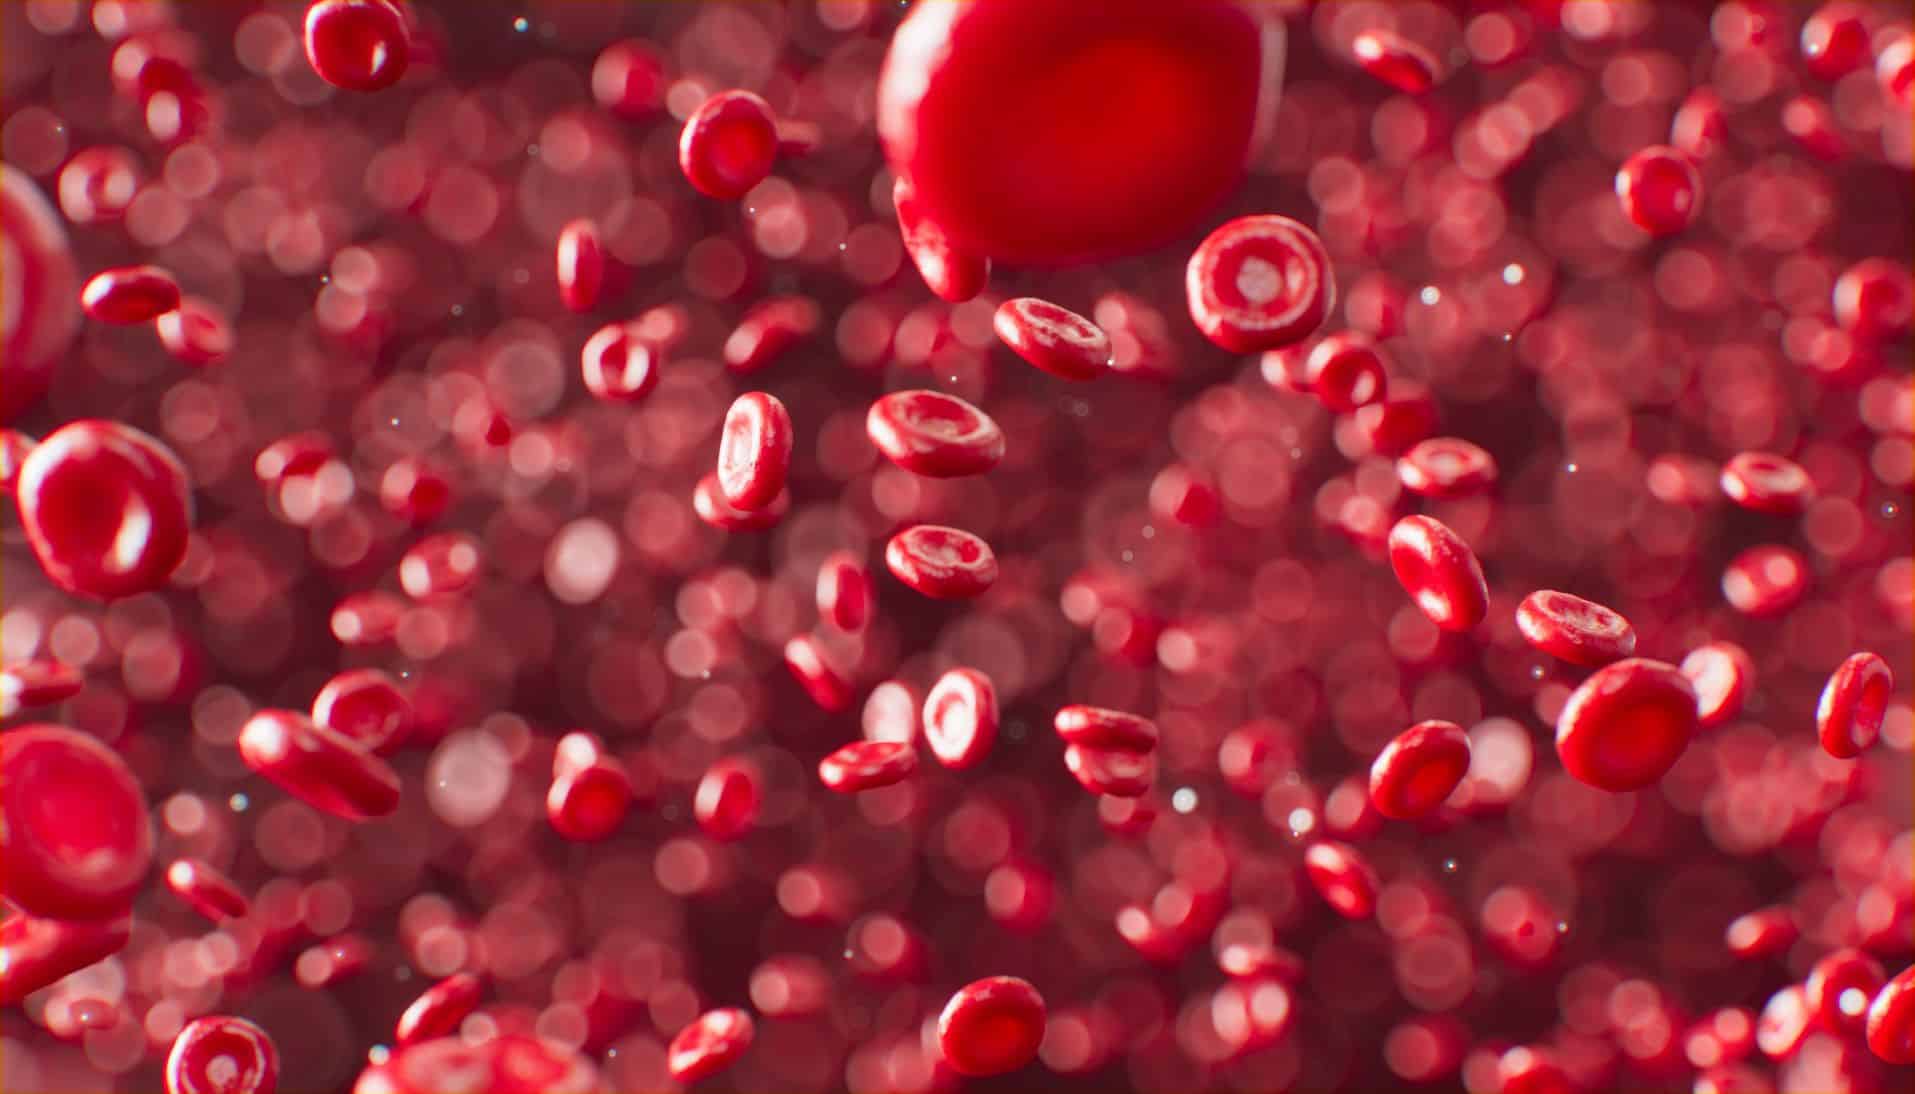 microscopic image of blood platelets